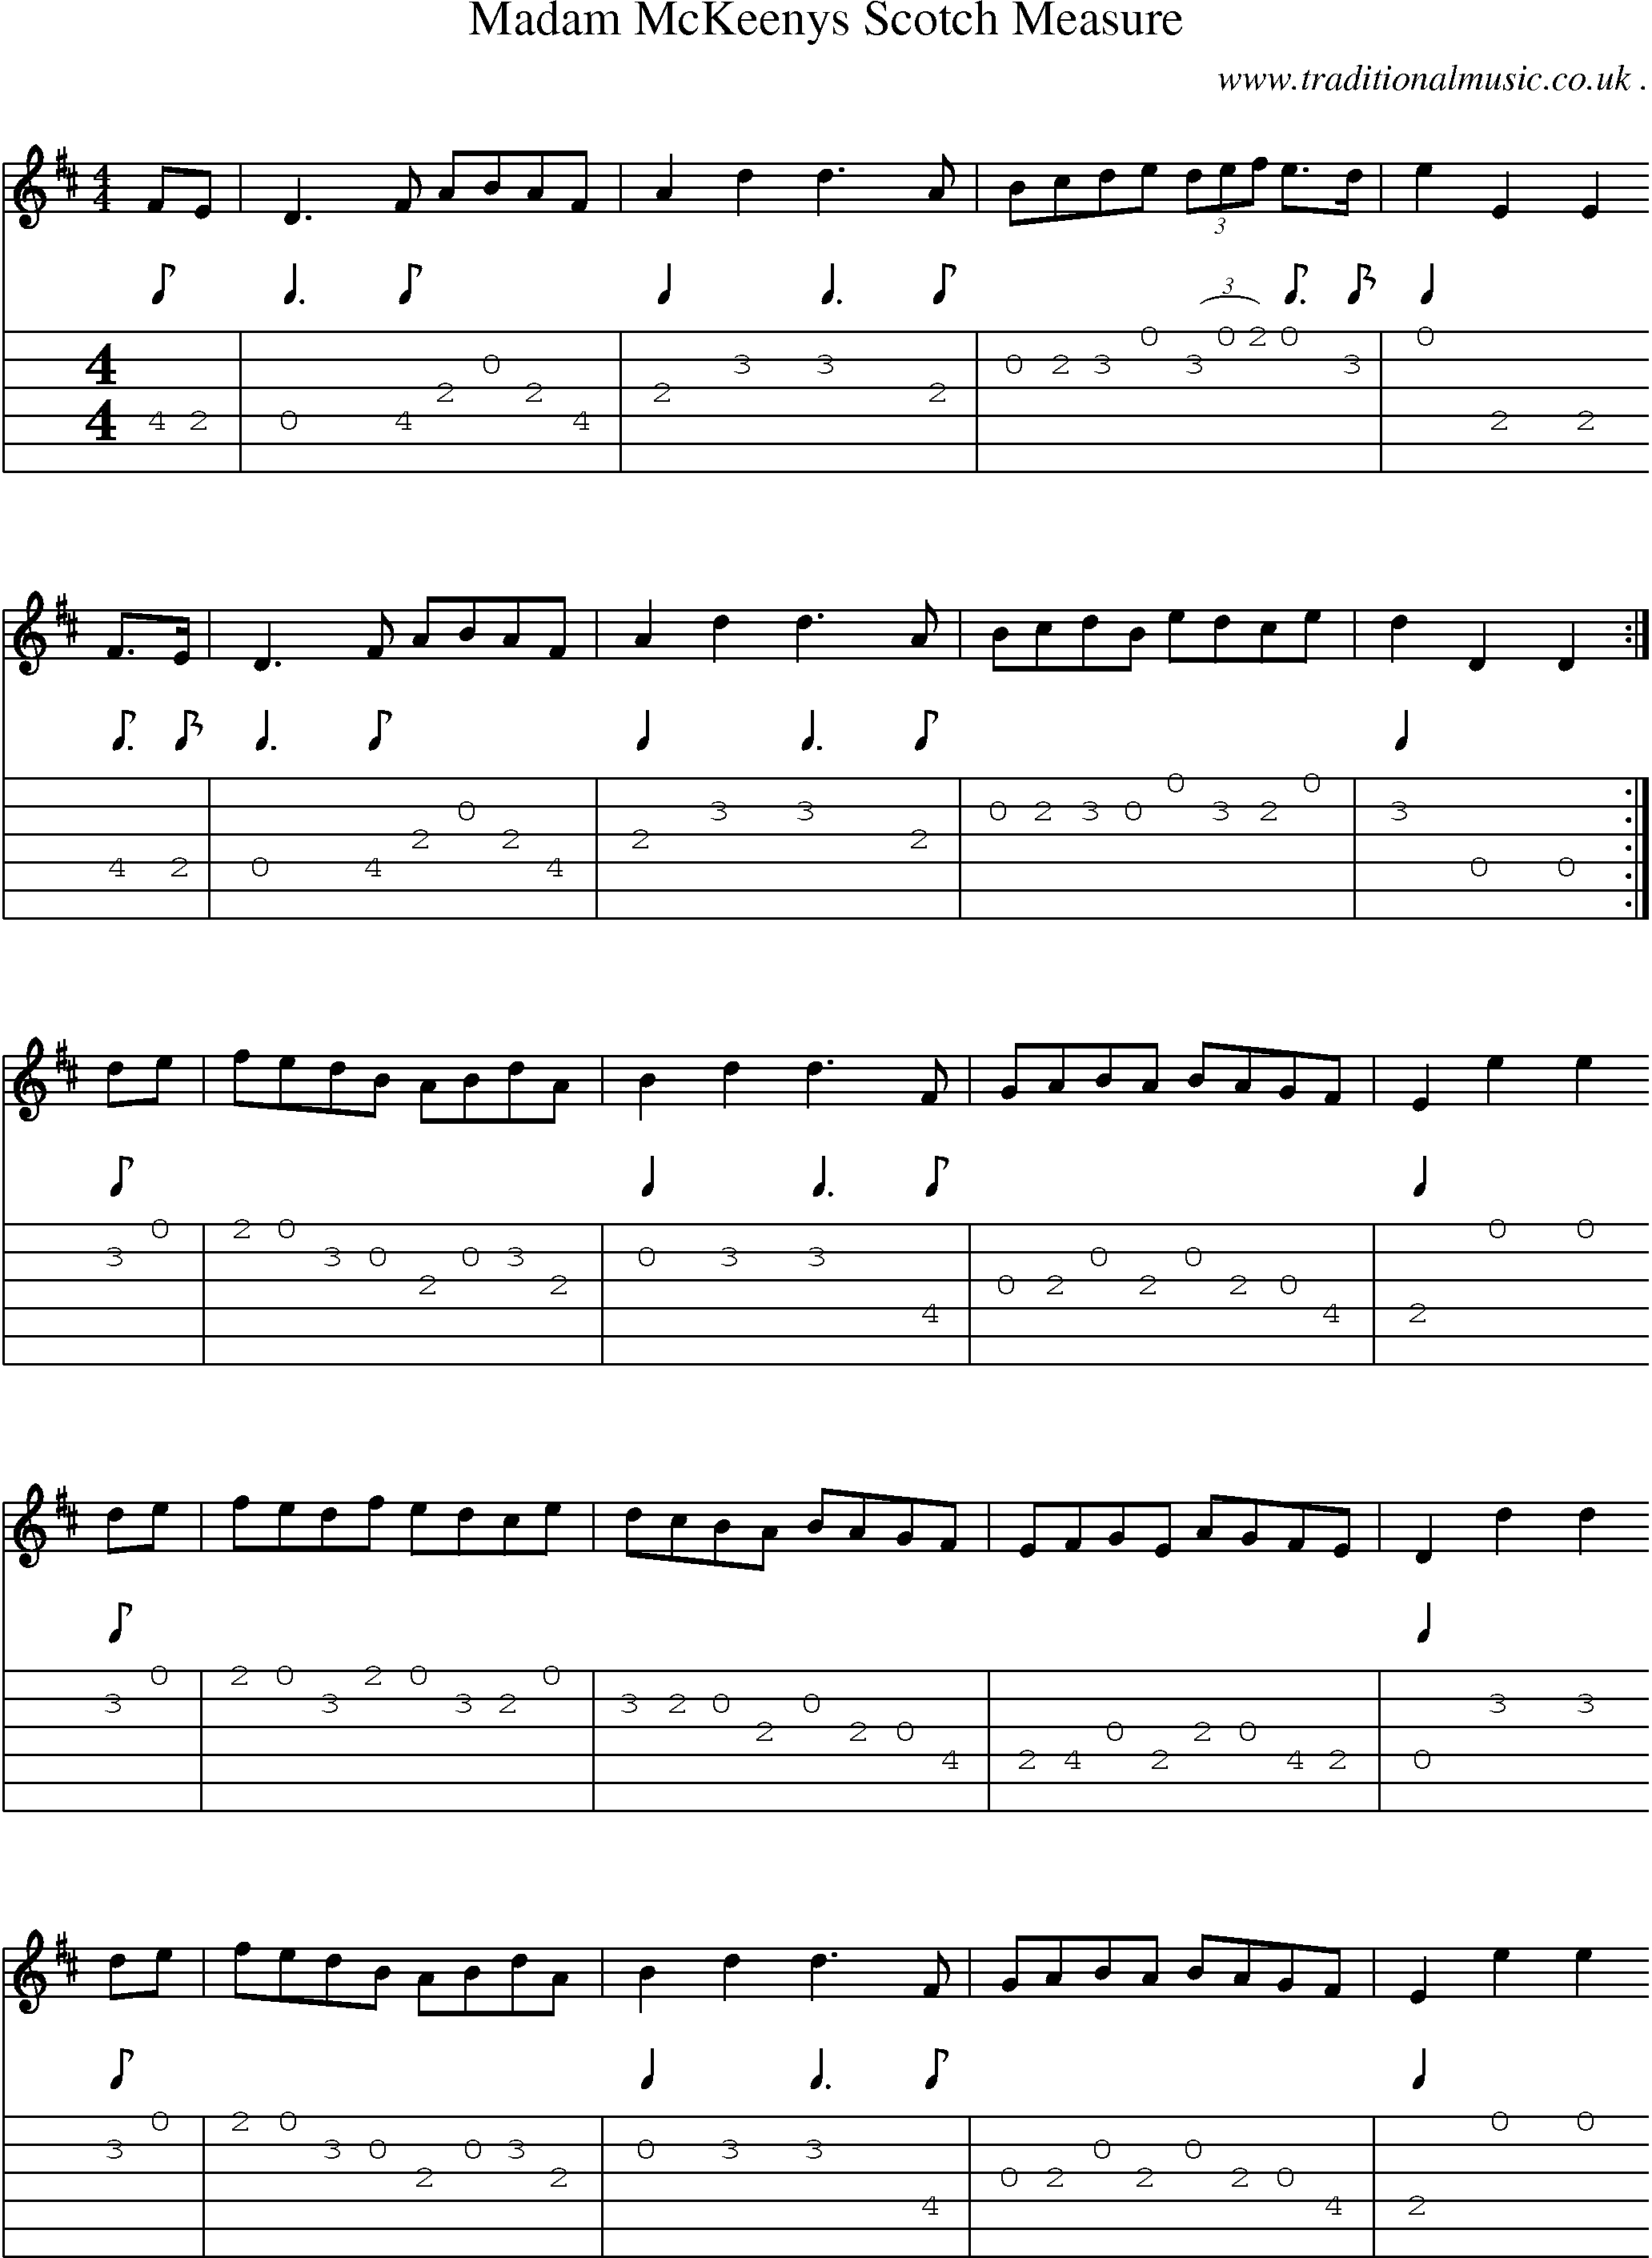 Sheet-music  score, Chords and Guitar Tabs for Madam Mckeenys Scotch Measure